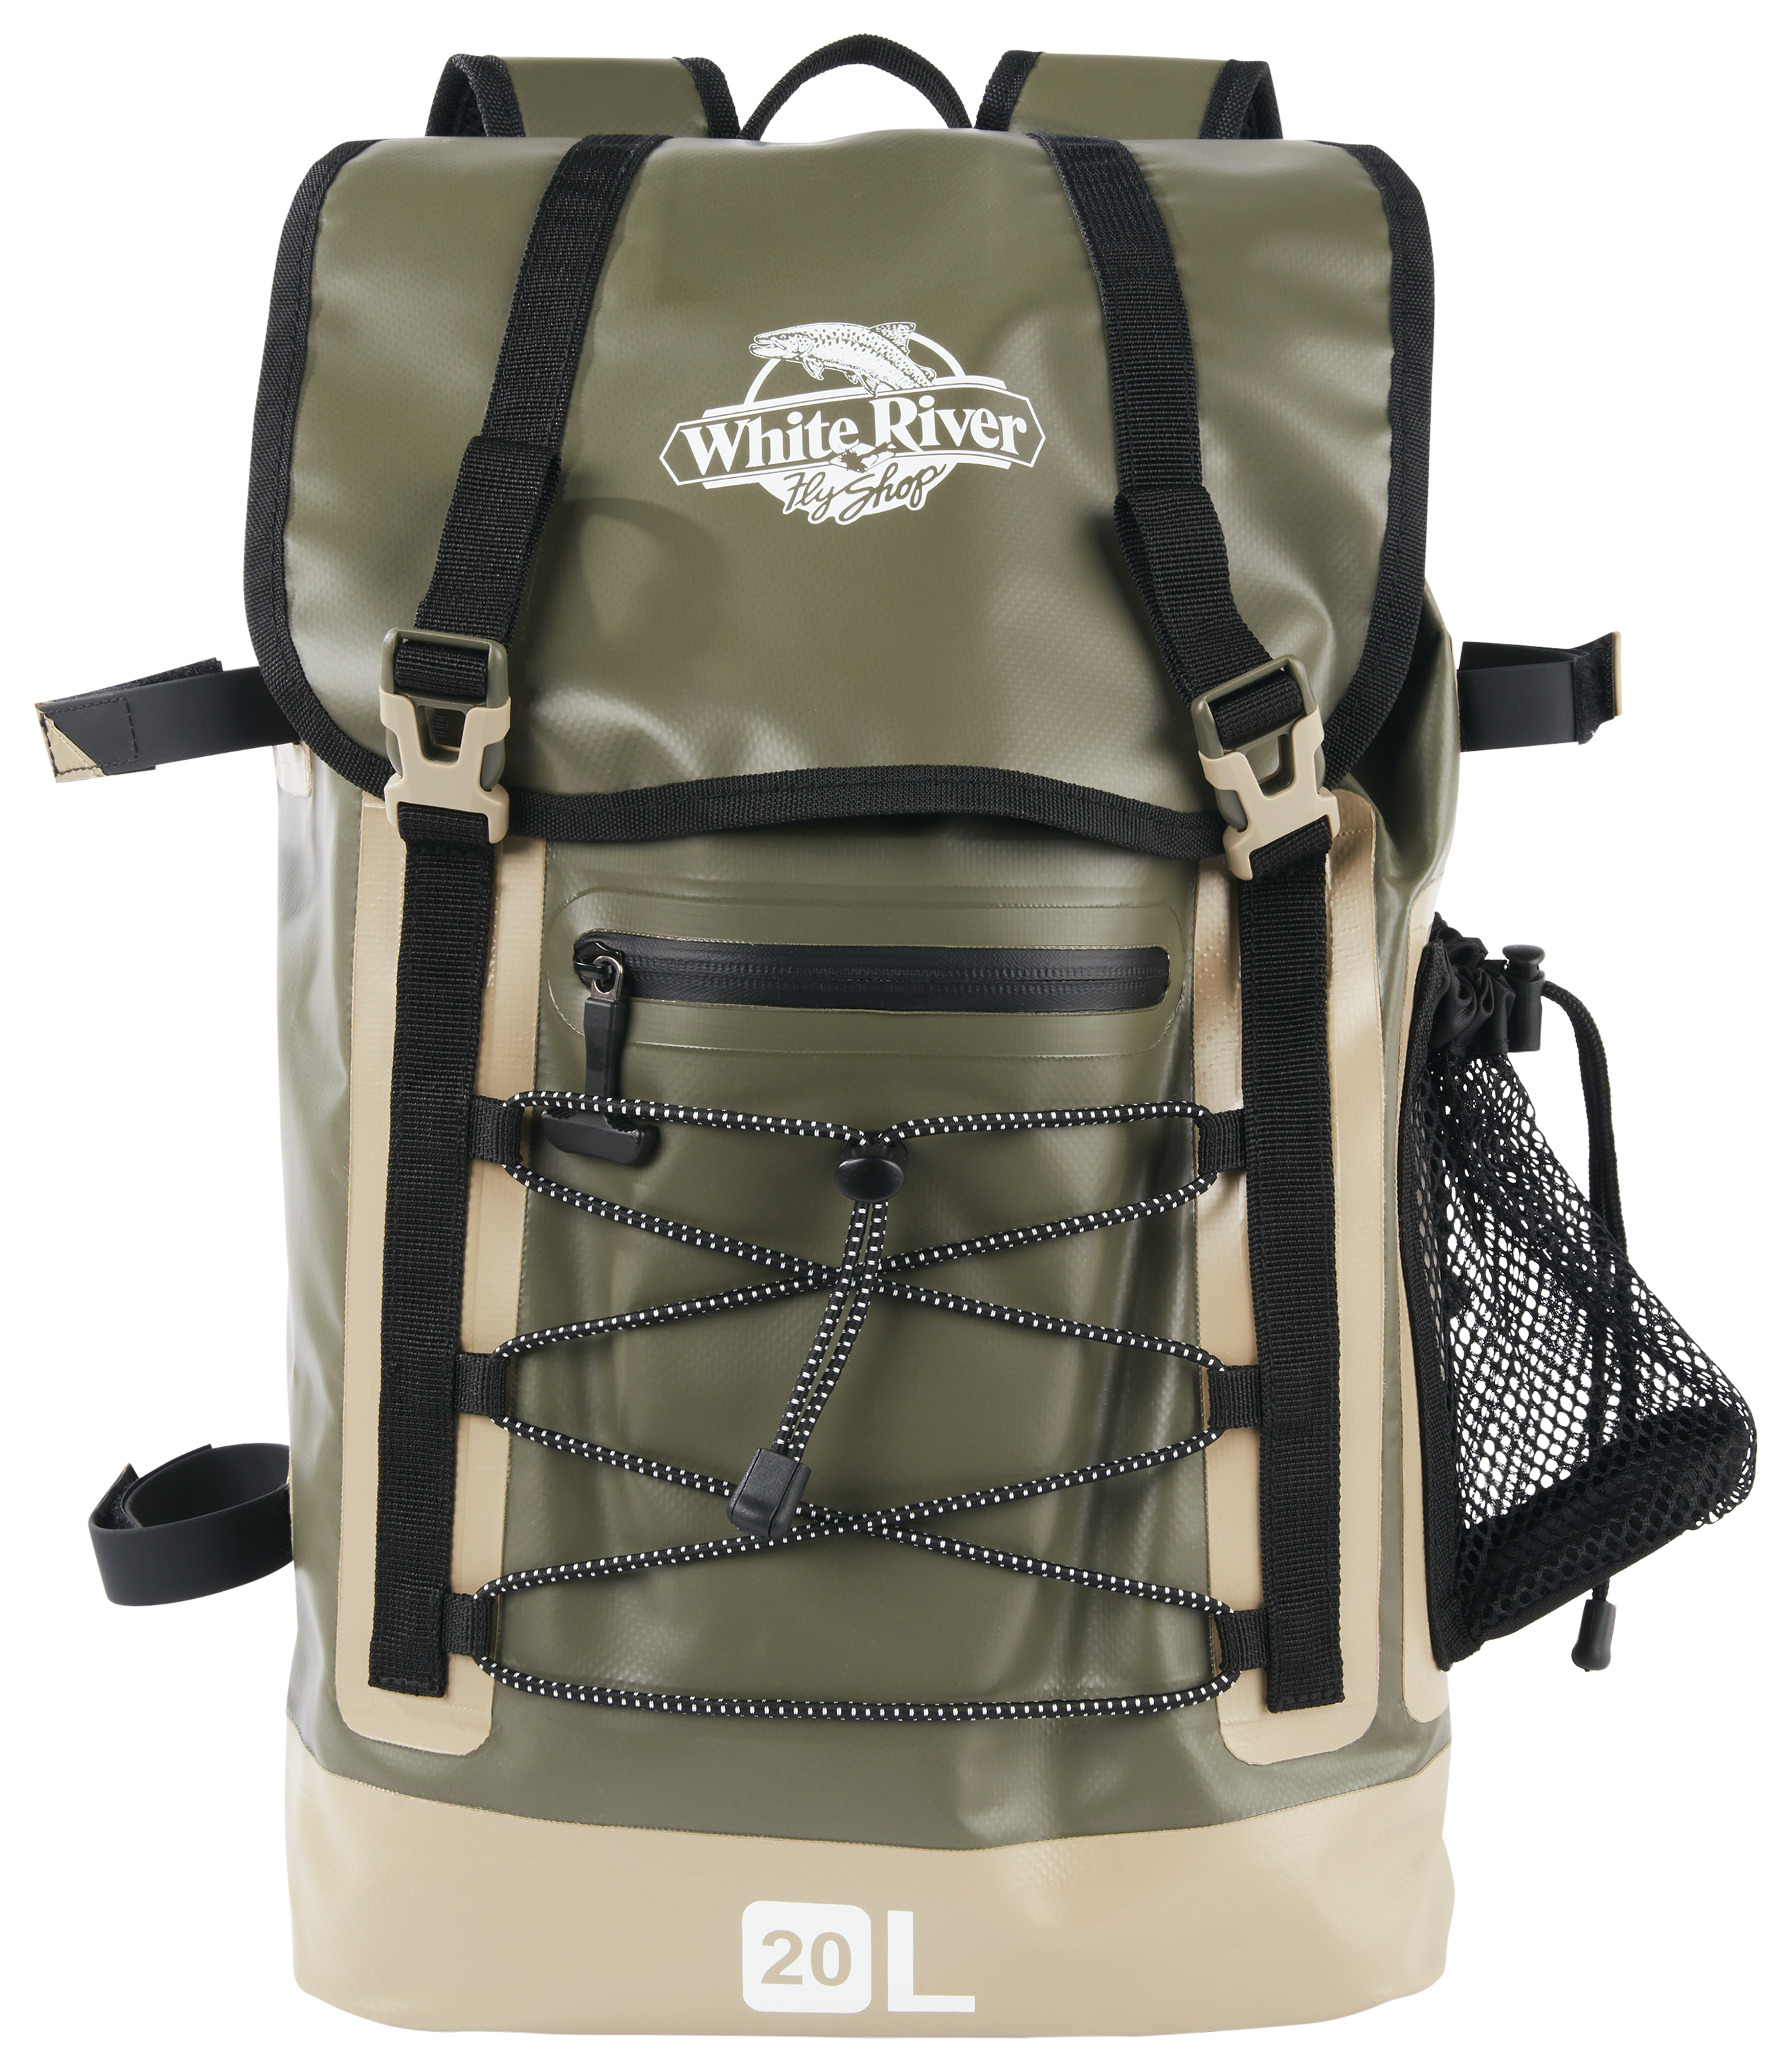 Fishing Seat Box Backpack Camping Tackle Bag Army Green – the best